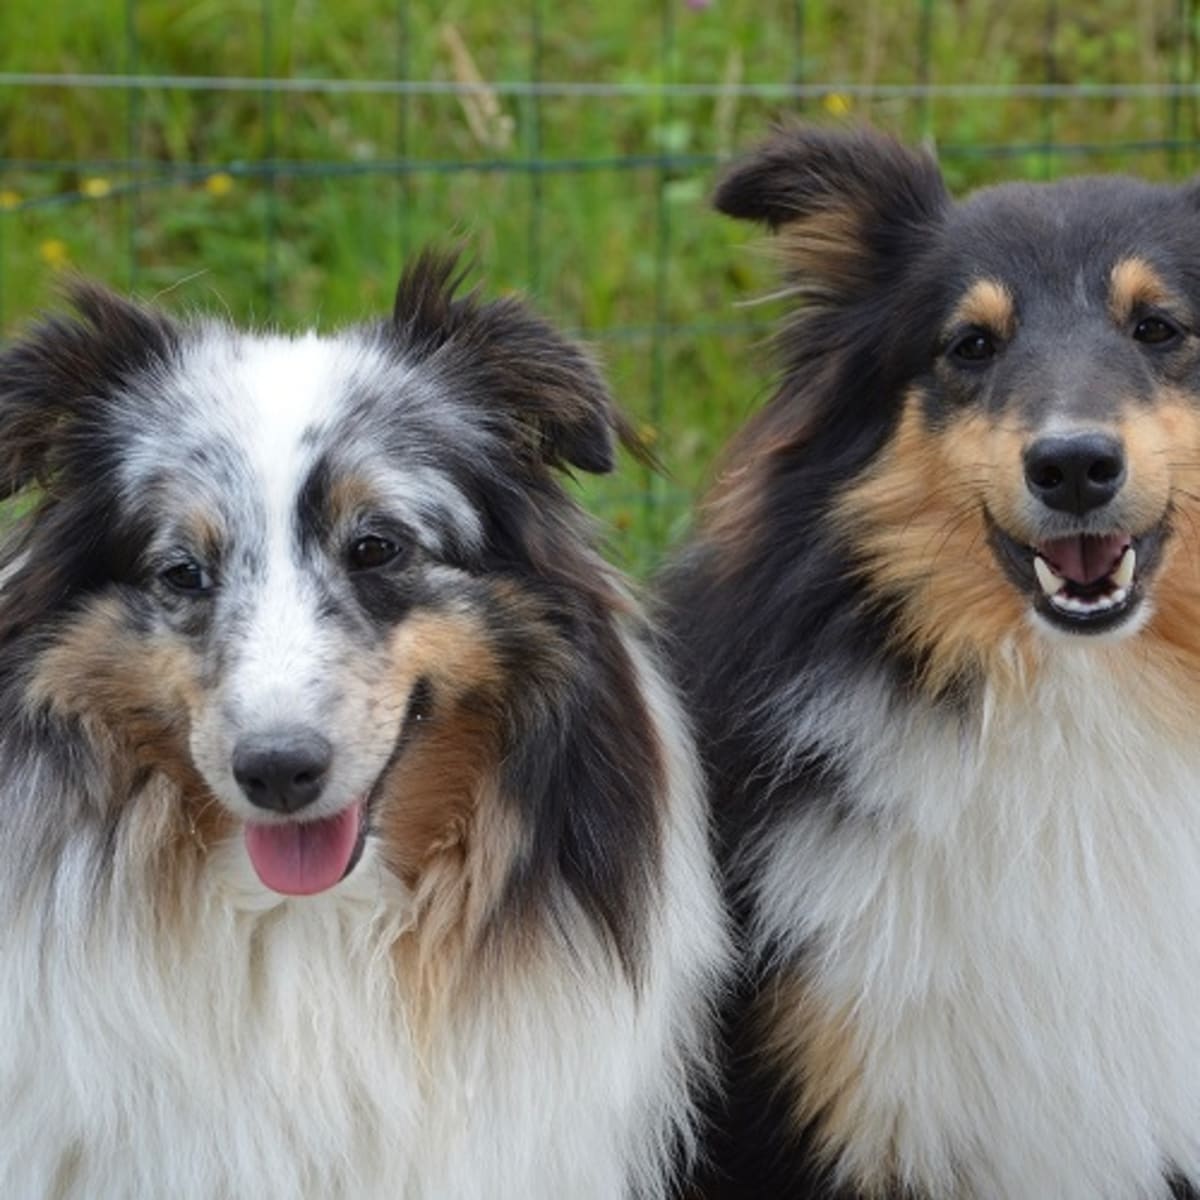 how long do dogs stay together after mating